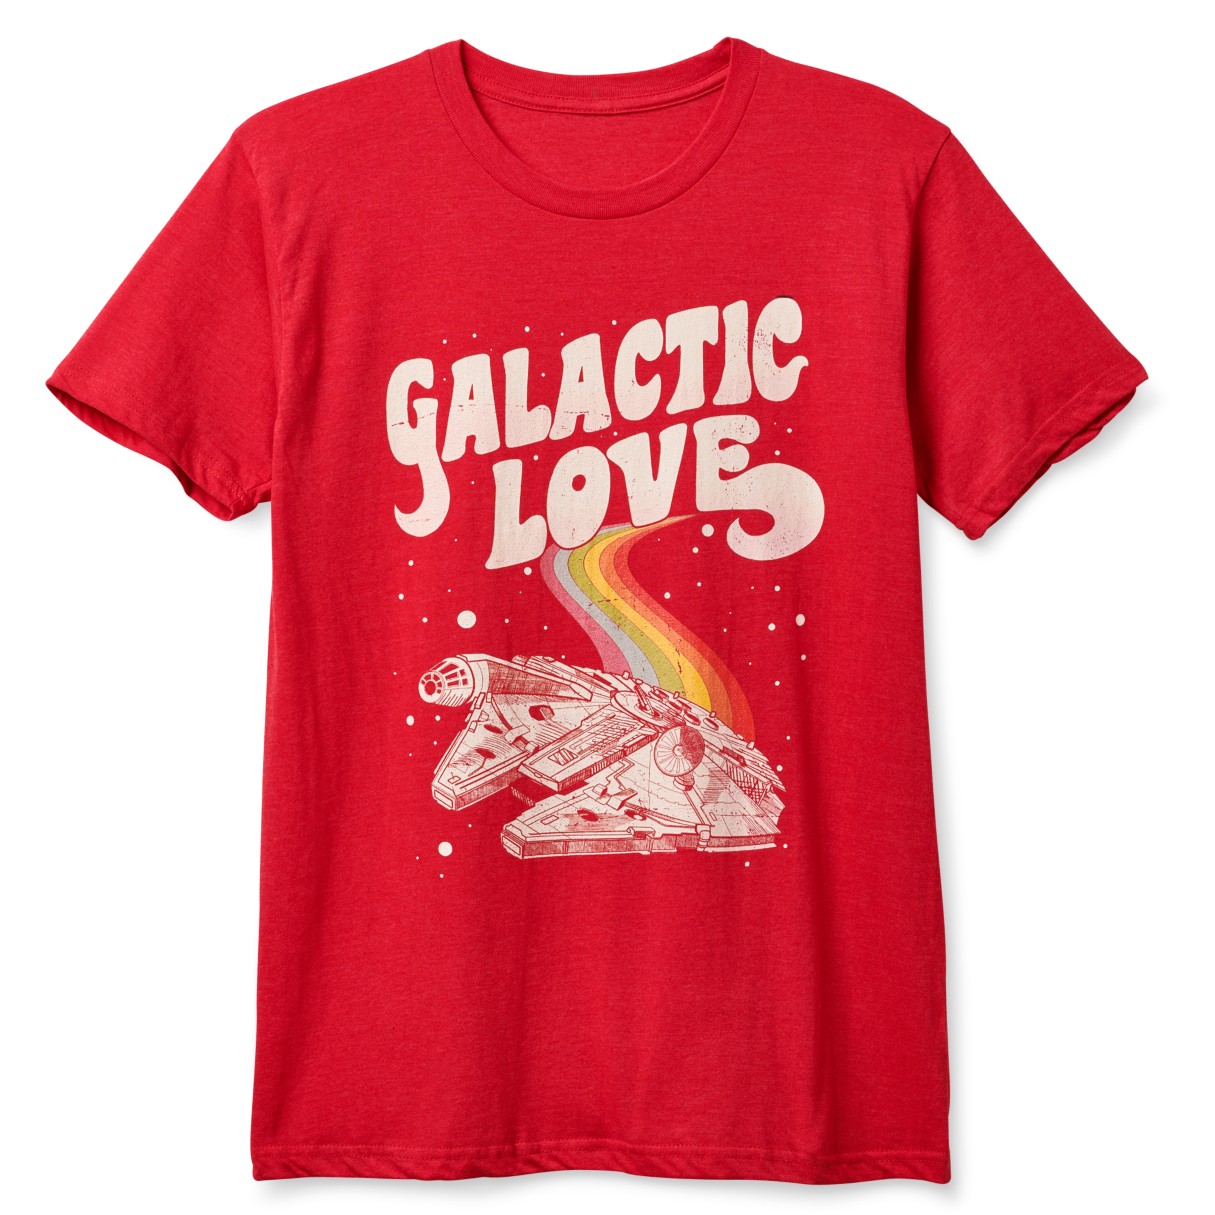 Millennium Falcon ''Galactic Love'' T-Shirt for Adults – Star Wars